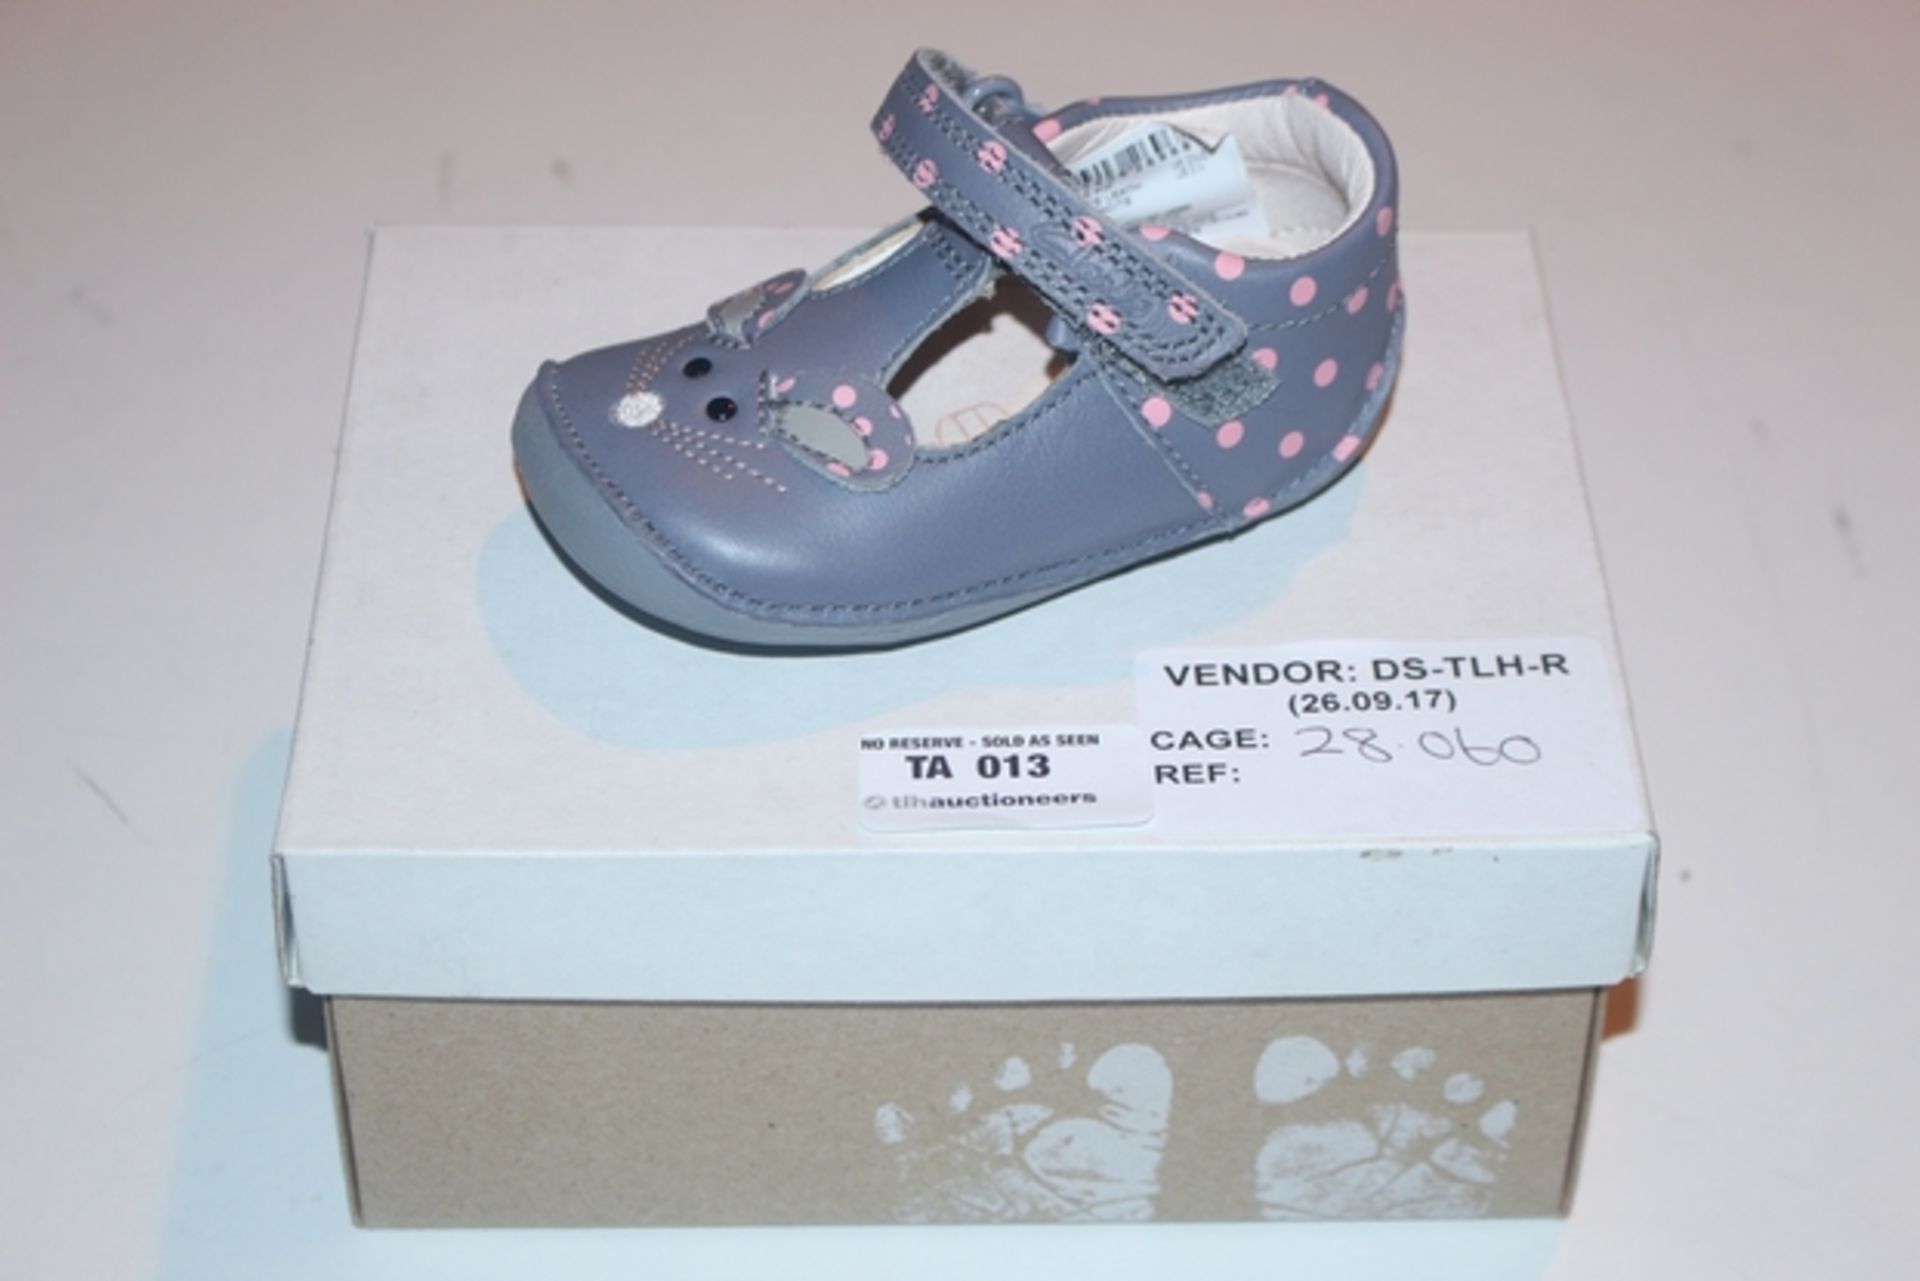 1X BOXED UNUSED PAIR OF CLARKS CHILDREN'S SHOES SIZE 2.5E RRP £30 (DS-TLH-R) (28.060)